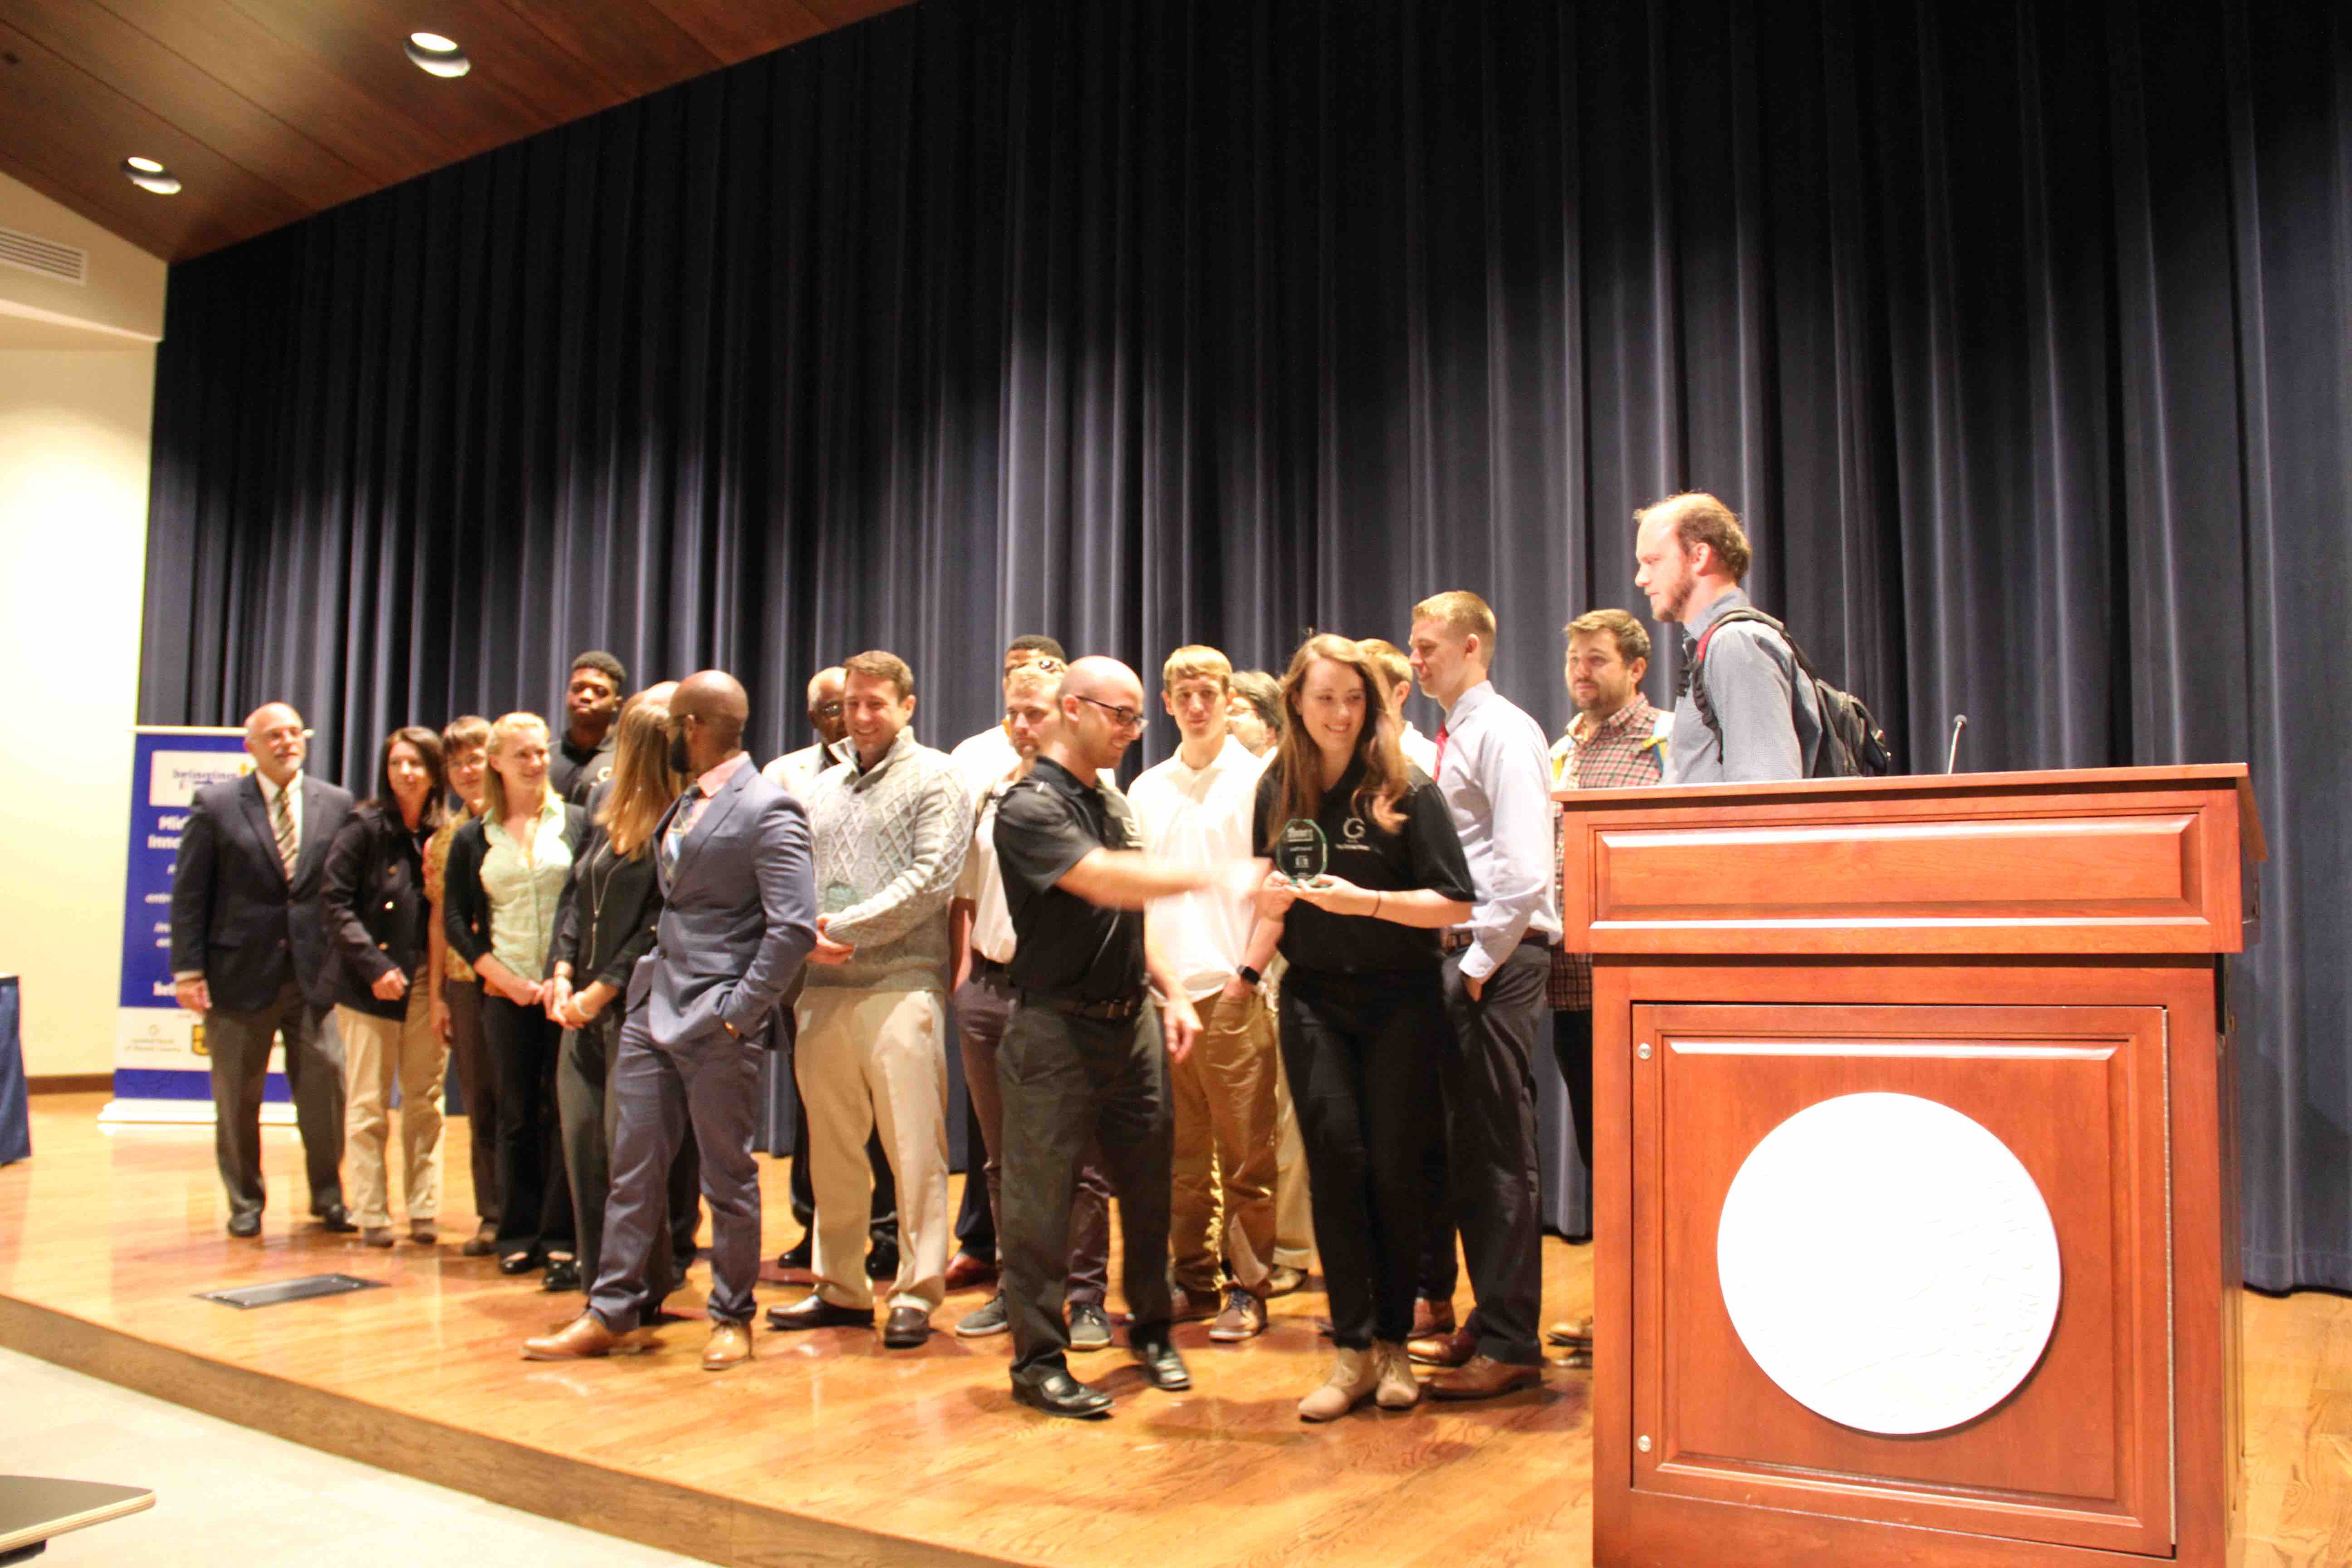 The participants in Monday's pitch competition for Bringing Up Business Innovation Week gather on stage.